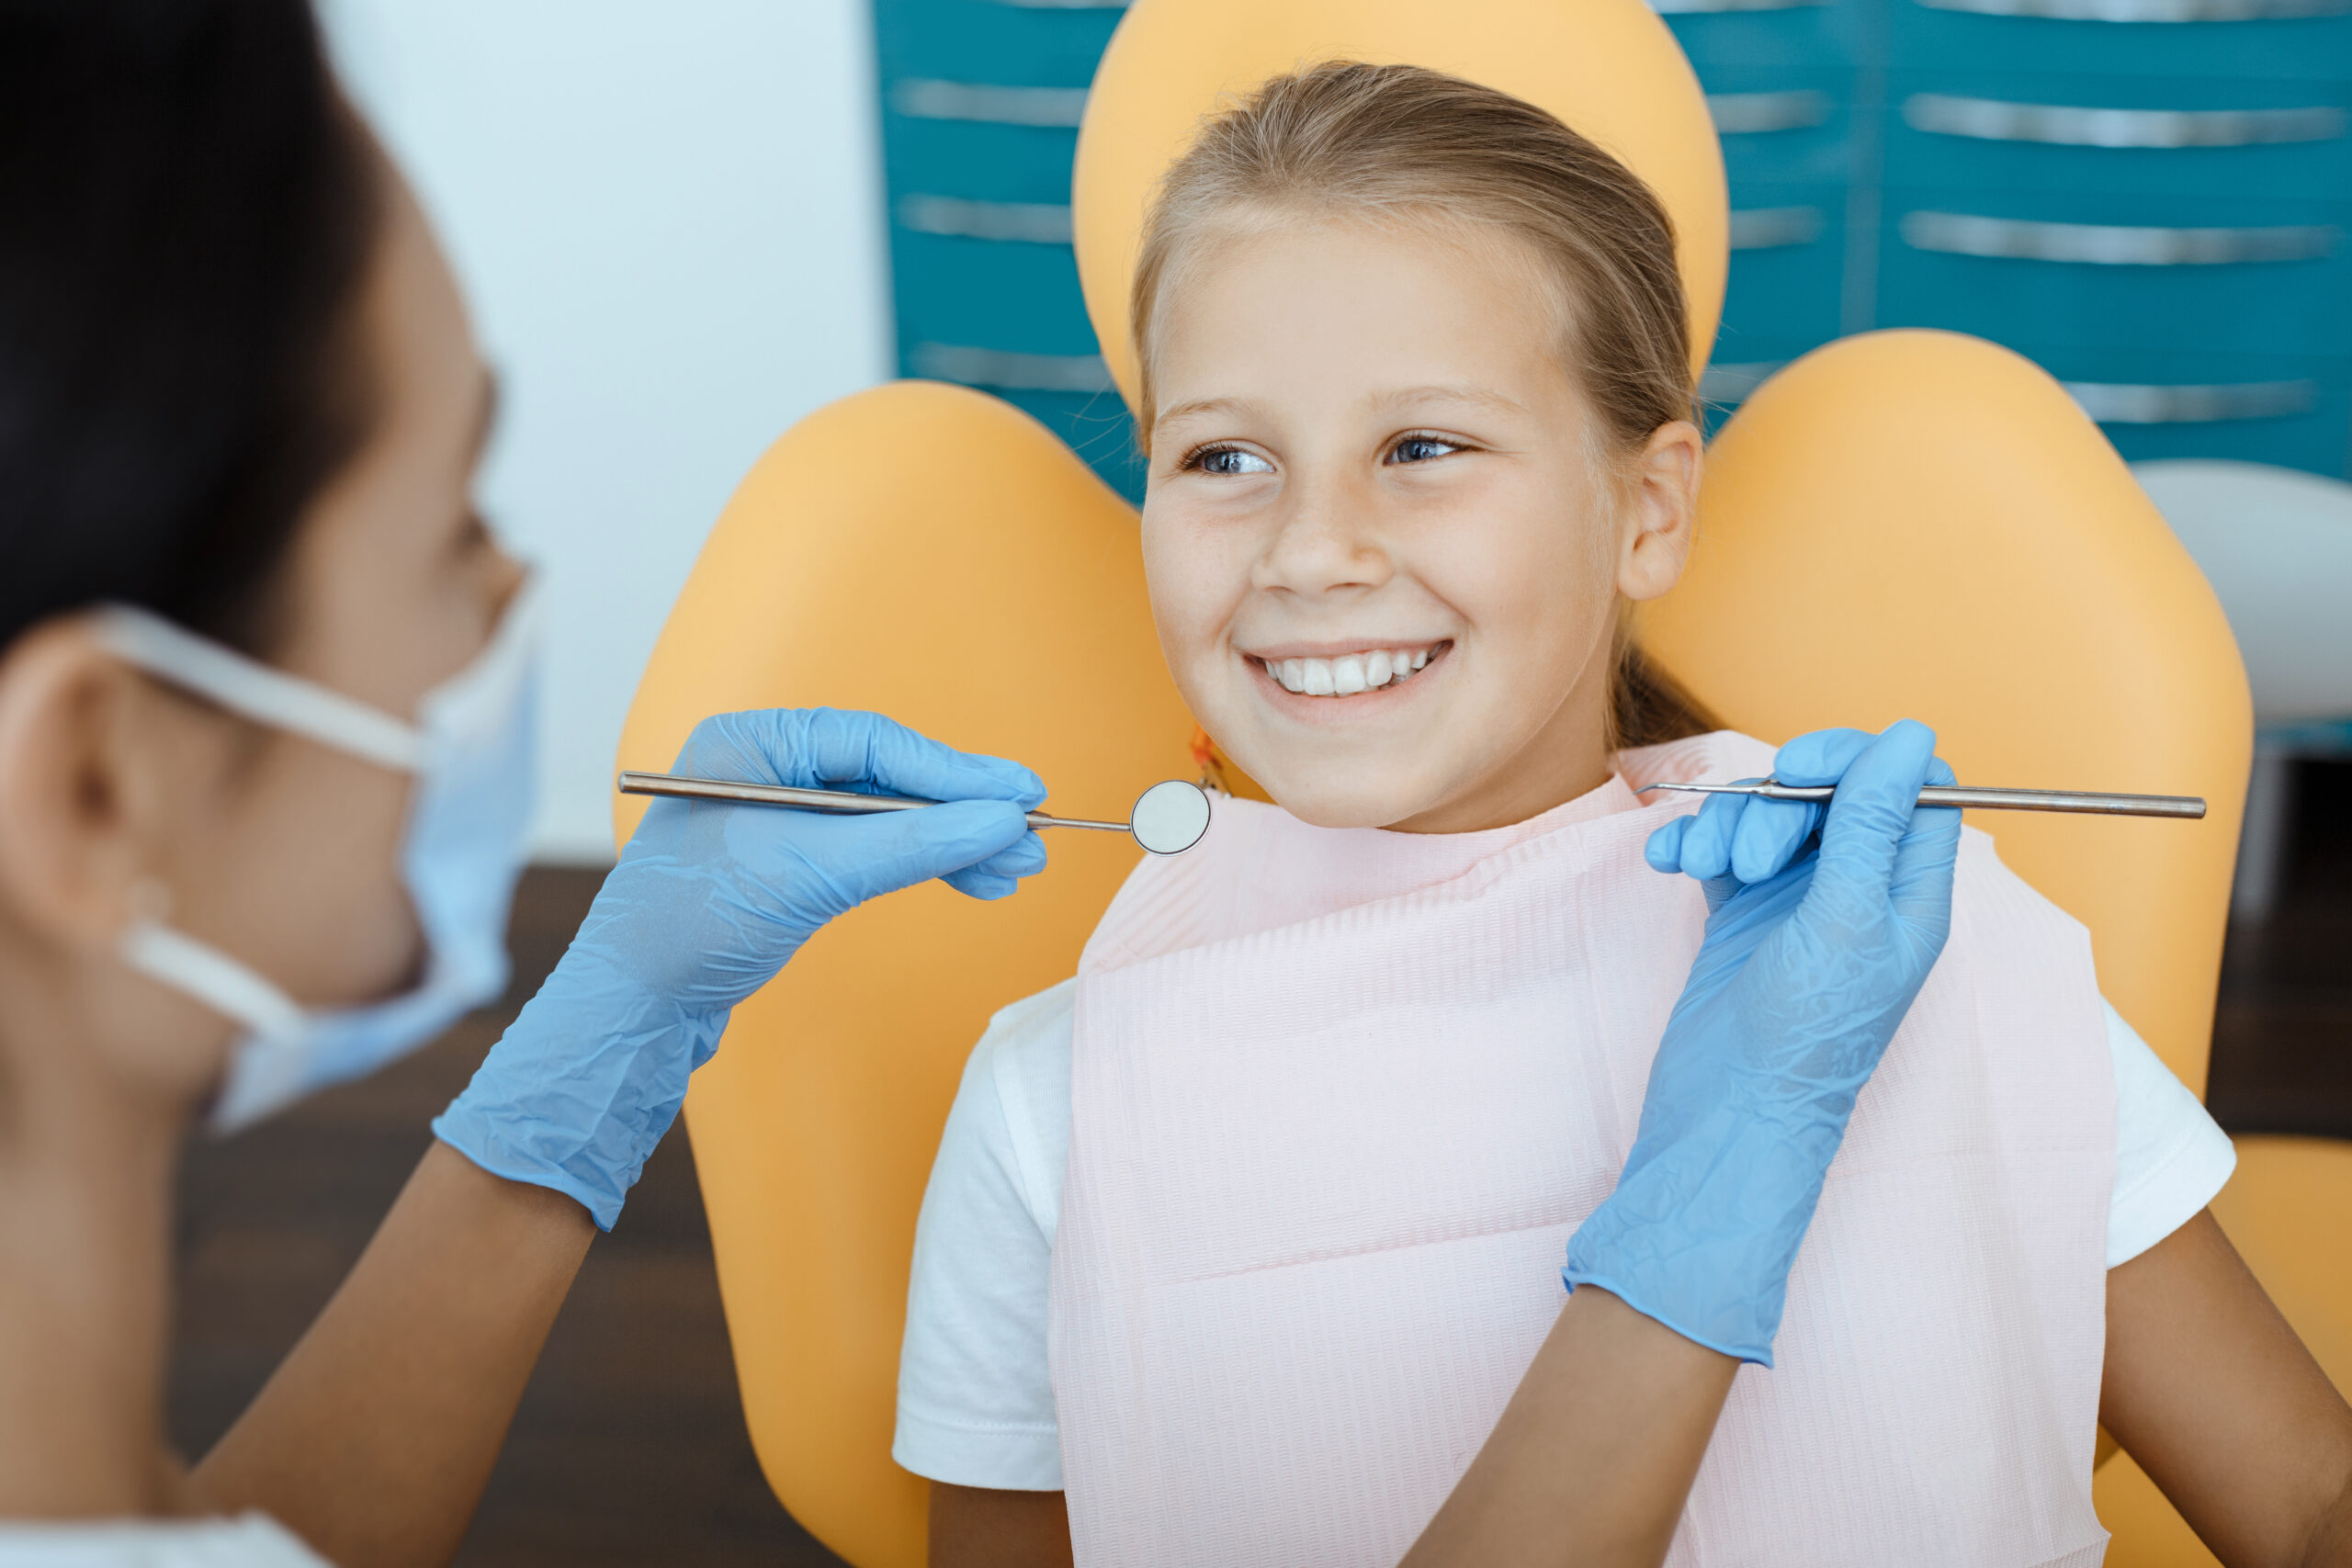 Oak Tree Pediatric Dentistry Makes Dental Care More Affordable with In-Network Partnerships